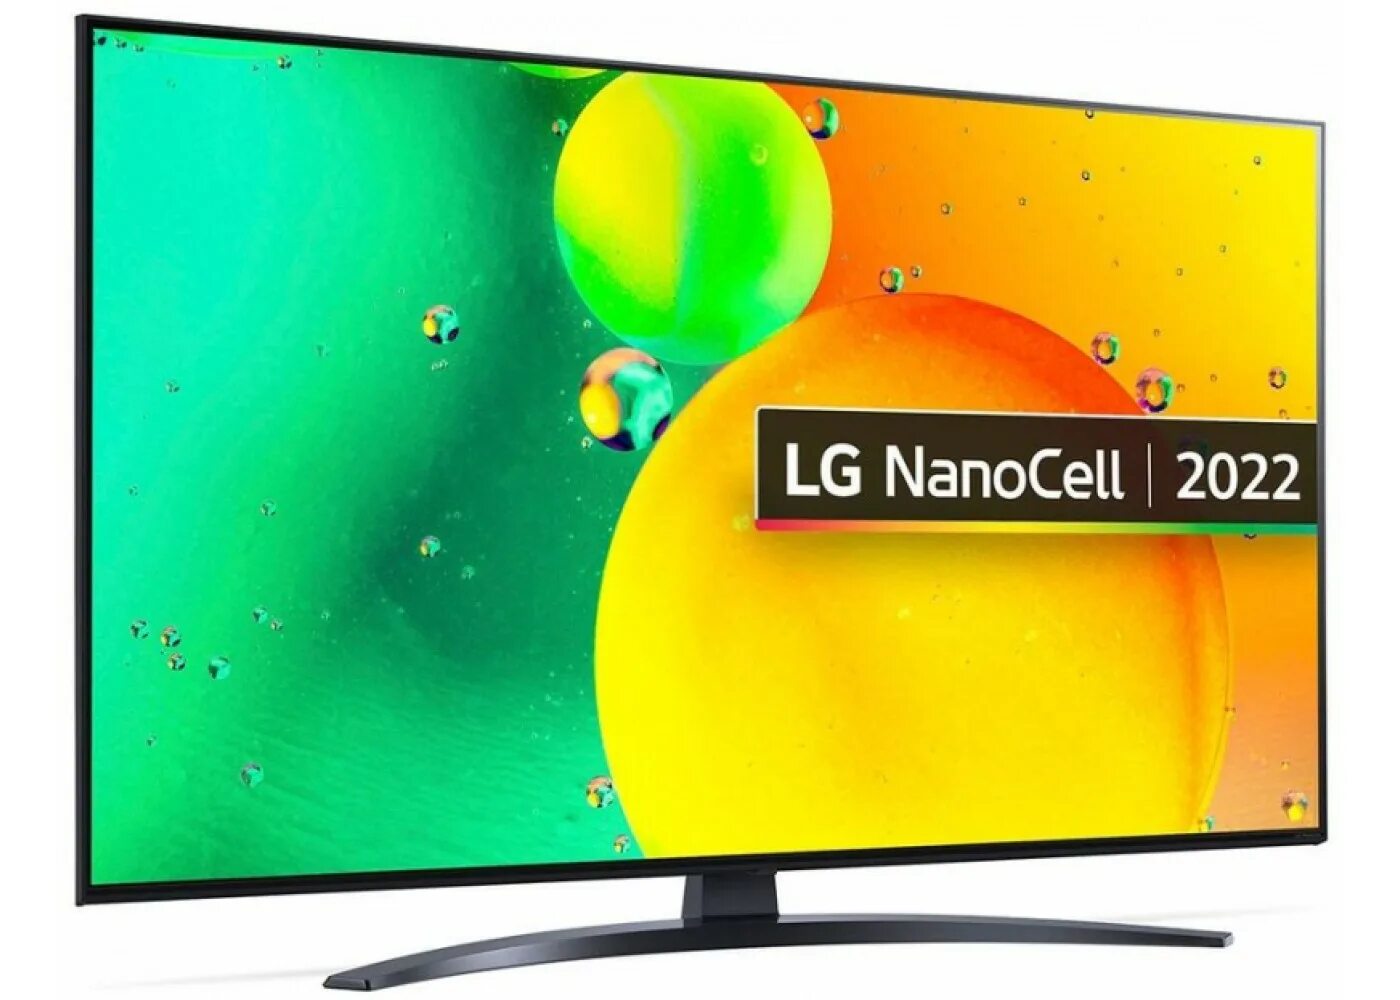 LG 65nano766qa. LG 55nano766qa. Led LG 65nano766qa. Телевизор LG 43nano776qa. Телевизор lg nano cell